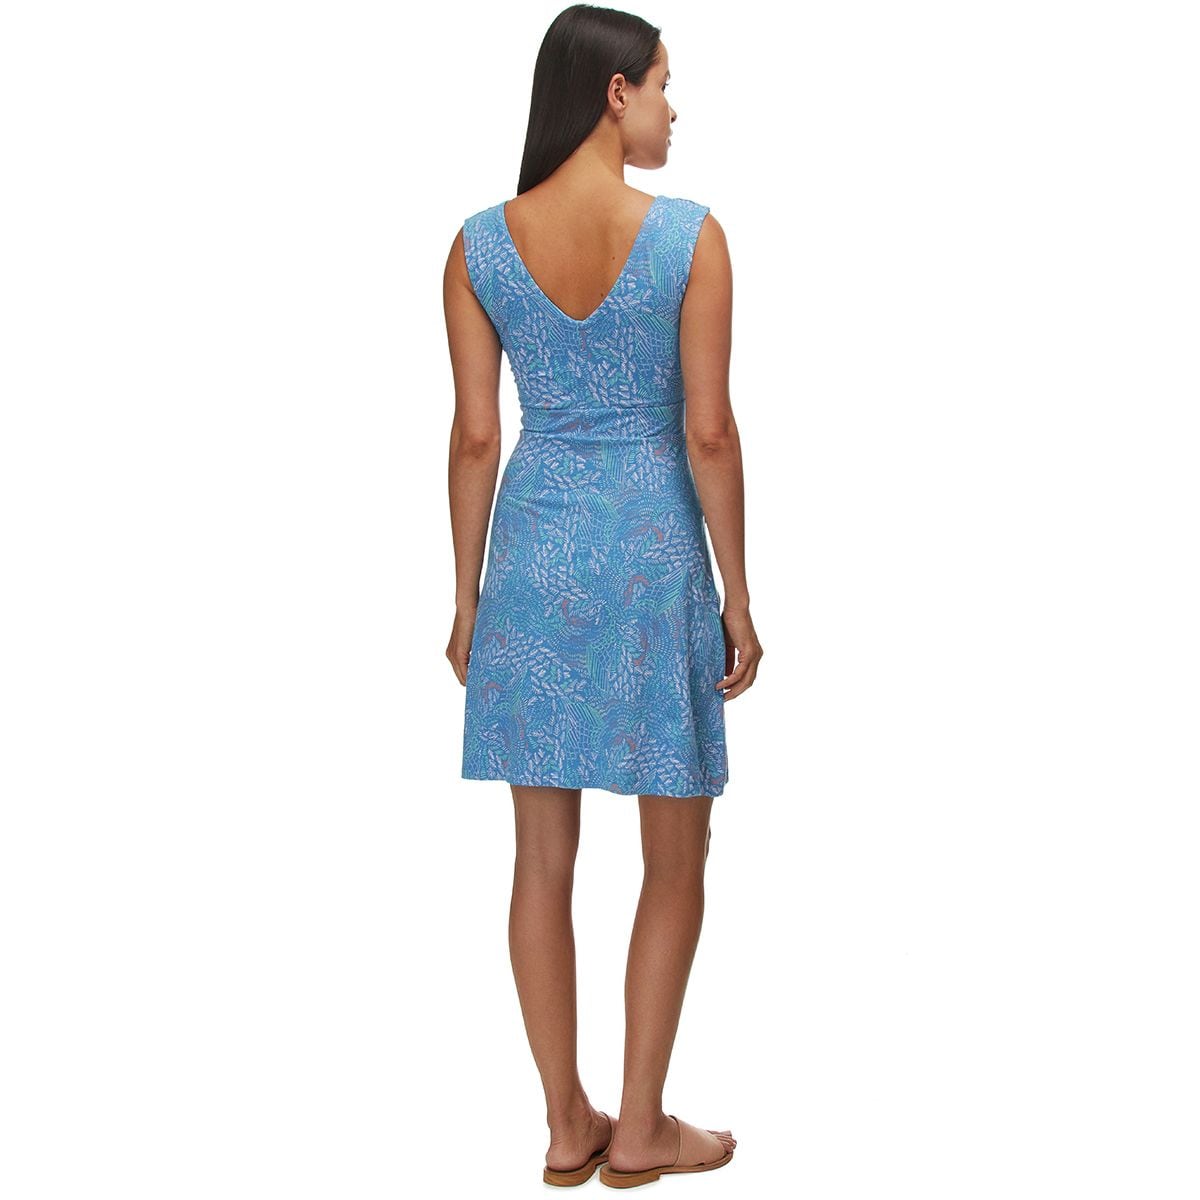 Patagonia Porch Song Dress - Women's - Clothing